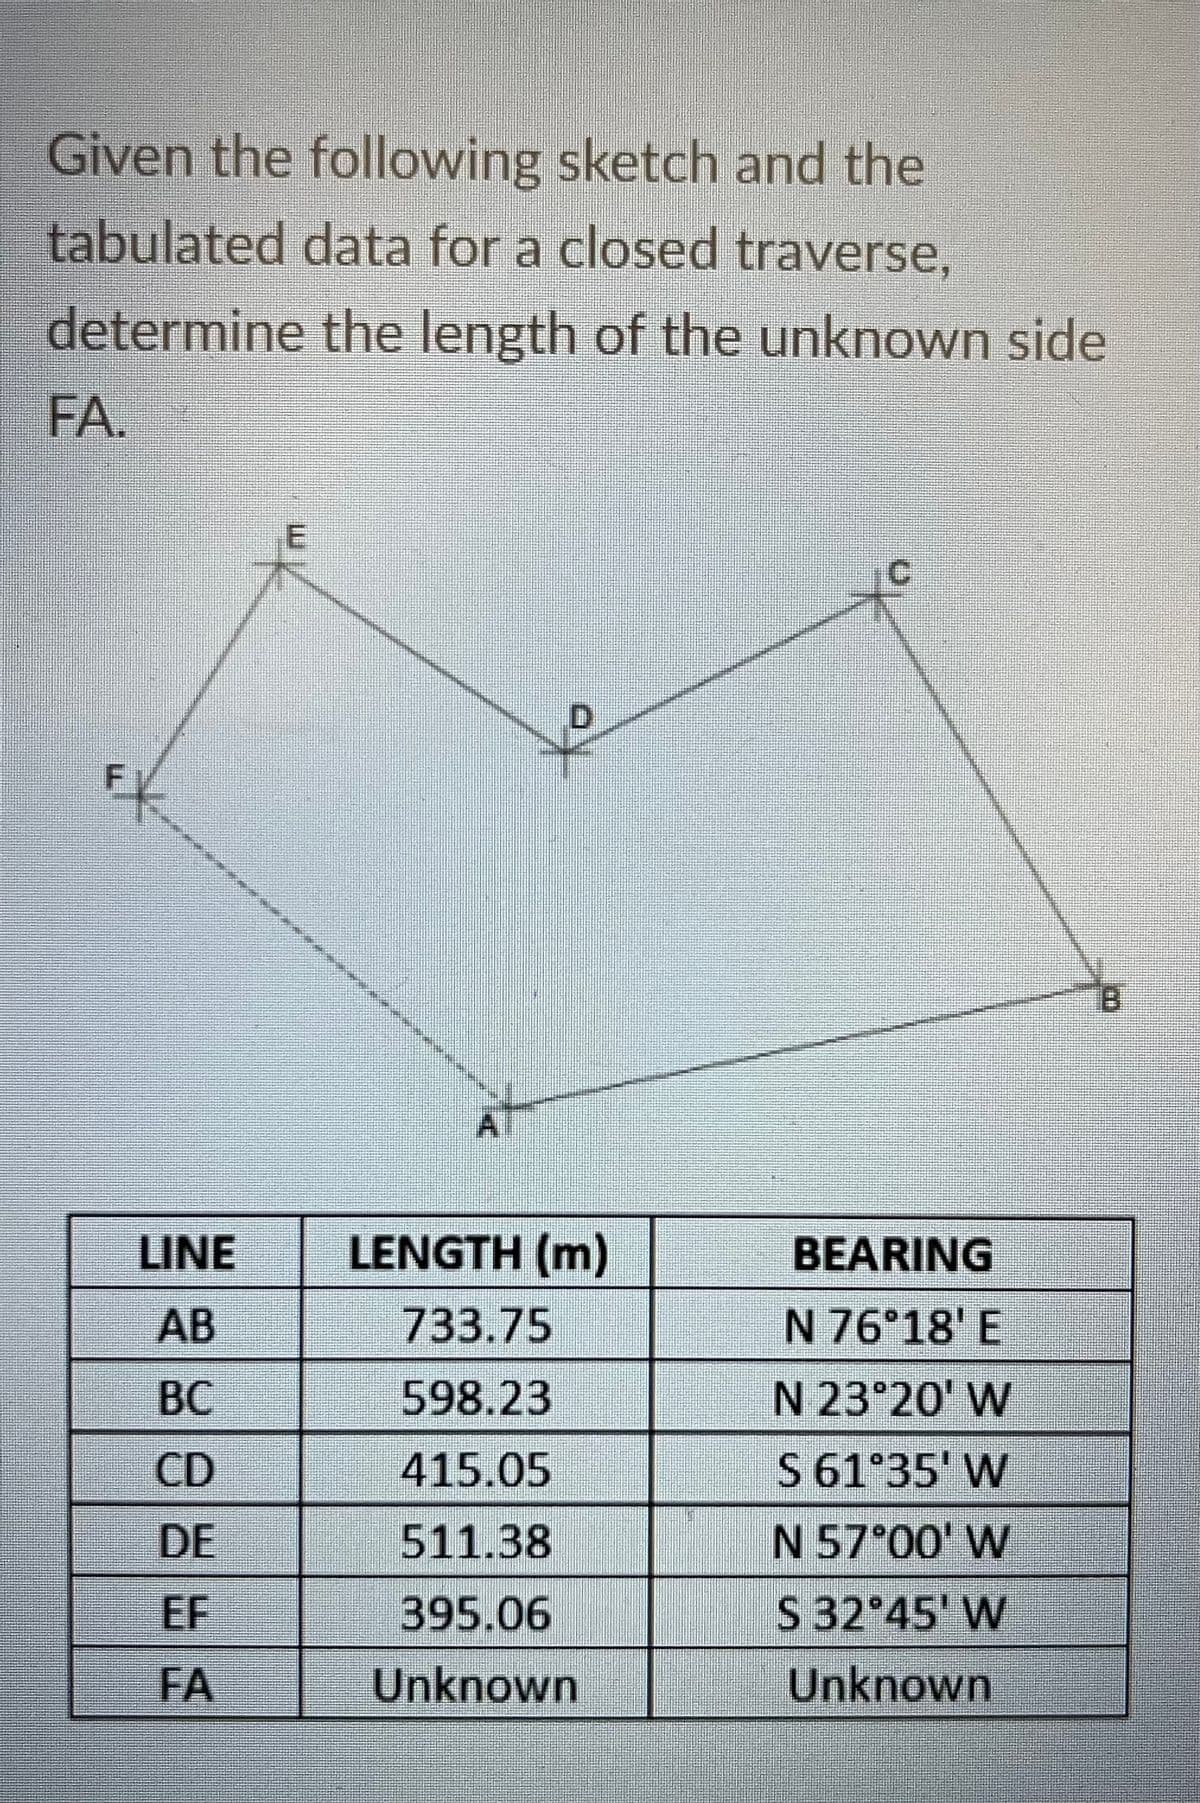 Given the following sketch and the
tabulated data for a closed traverse,
determine the length of the unknown side
FA.
D.
LINE
LENGTH (m)
BEARING
AB
733.75
N 76°18' E
BC
598.23
N 23 20' W
CD
415.05
S 61°35' W
DE
511.38
N 57°00' W
EF
395.06
S 32 45' W
FA
Unknown
Unknown
